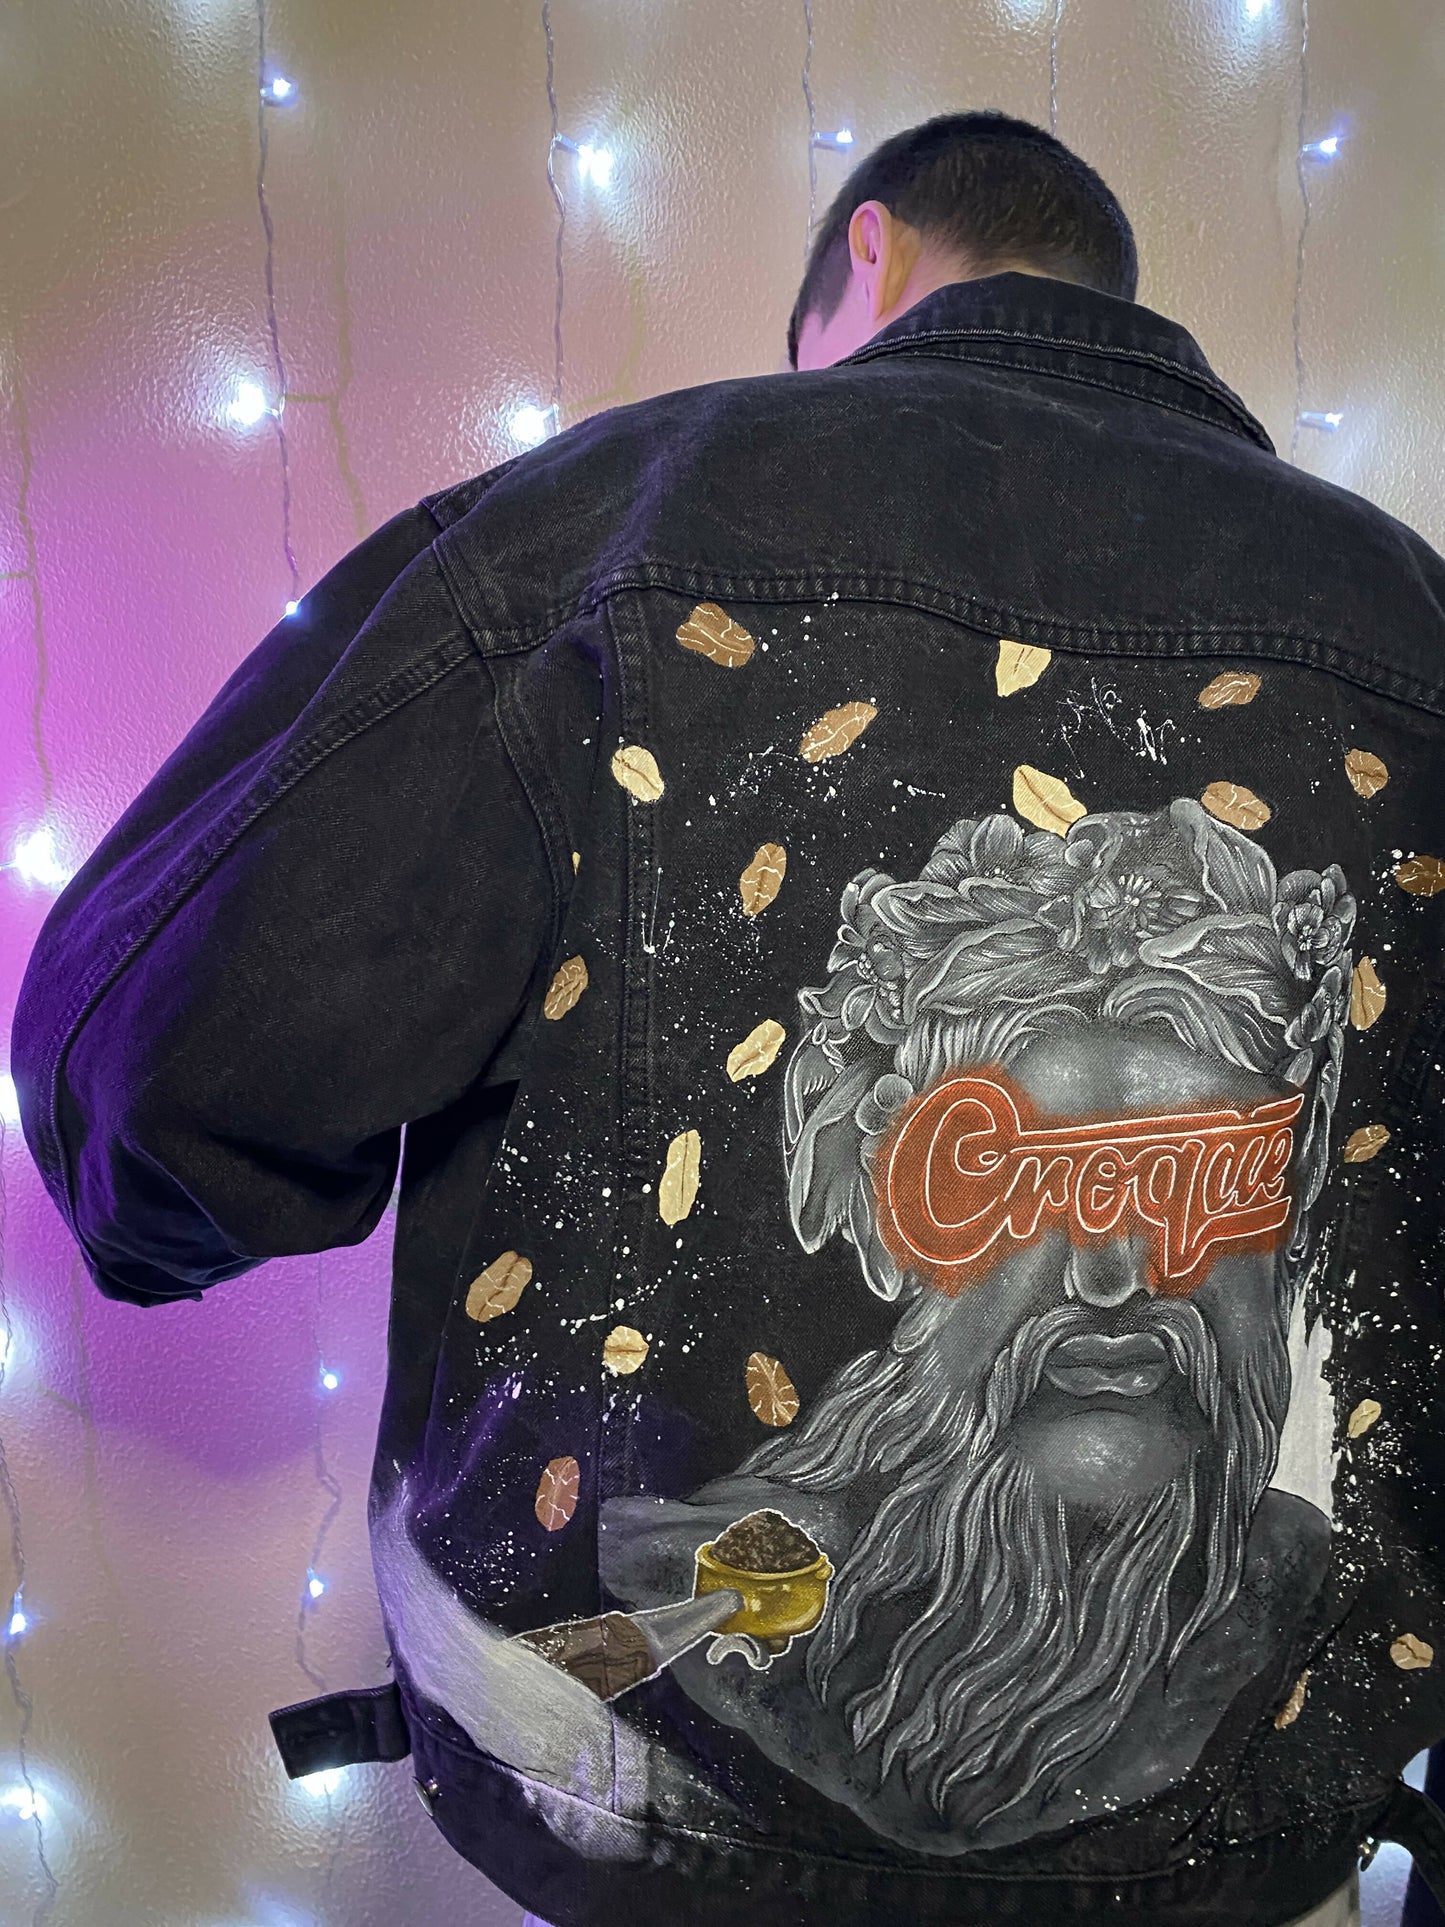 'ApolloDivine' Hand-Painted Jeans Jacket